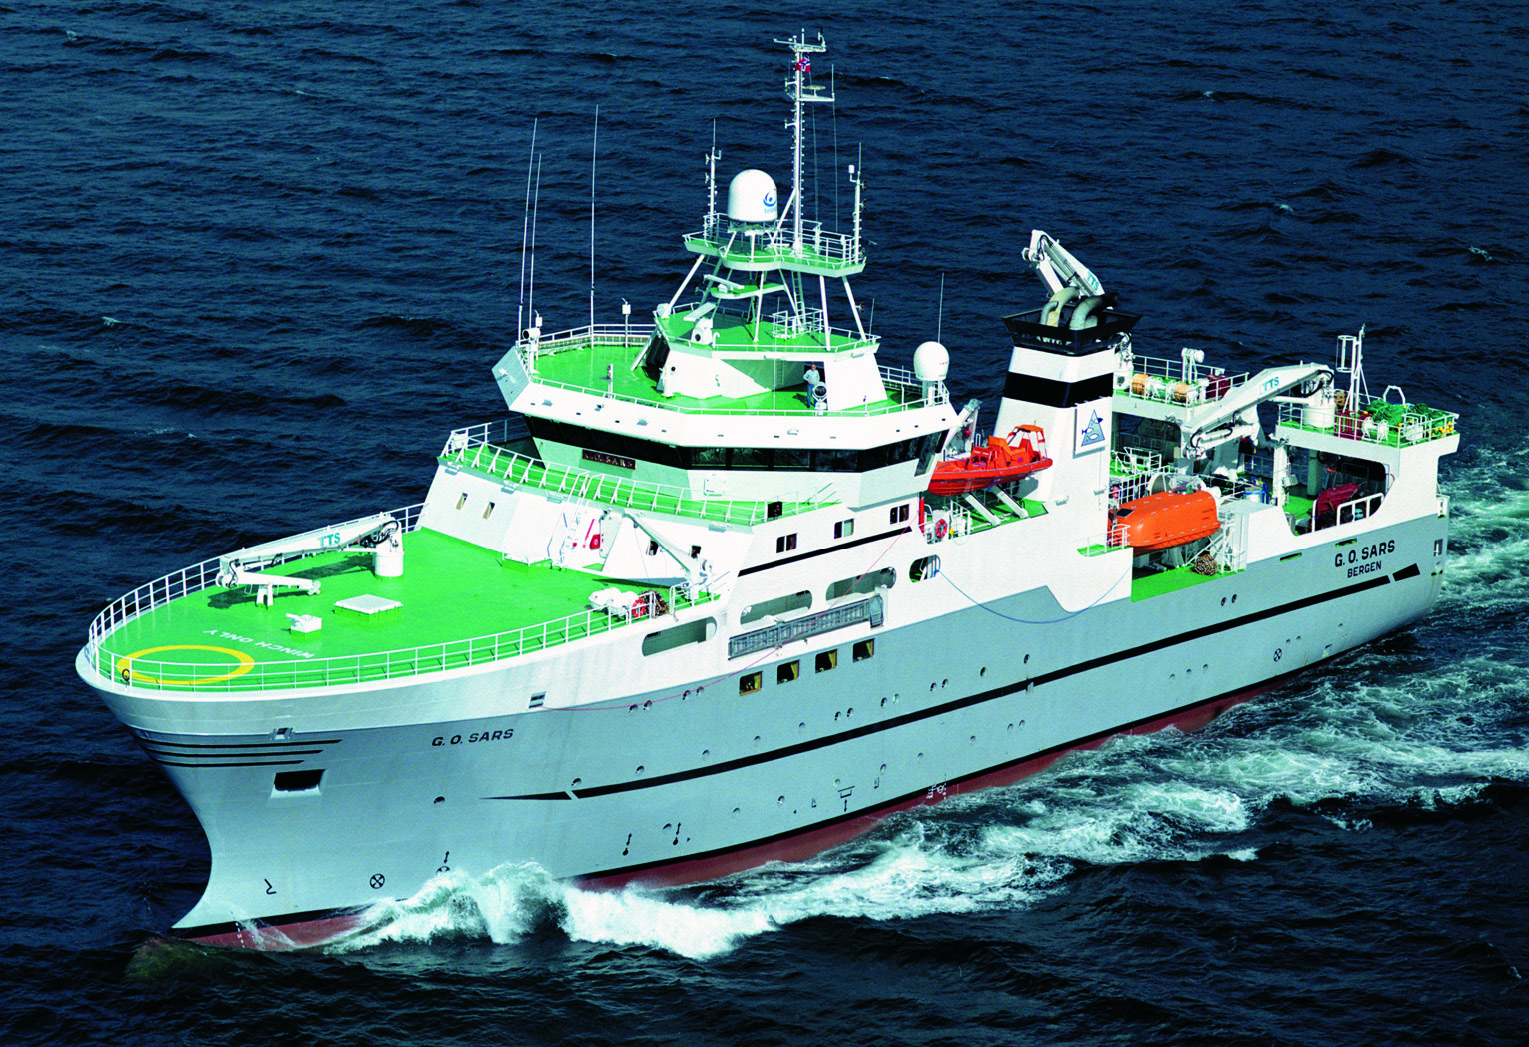 Fishery research vessel G.O. SARS 